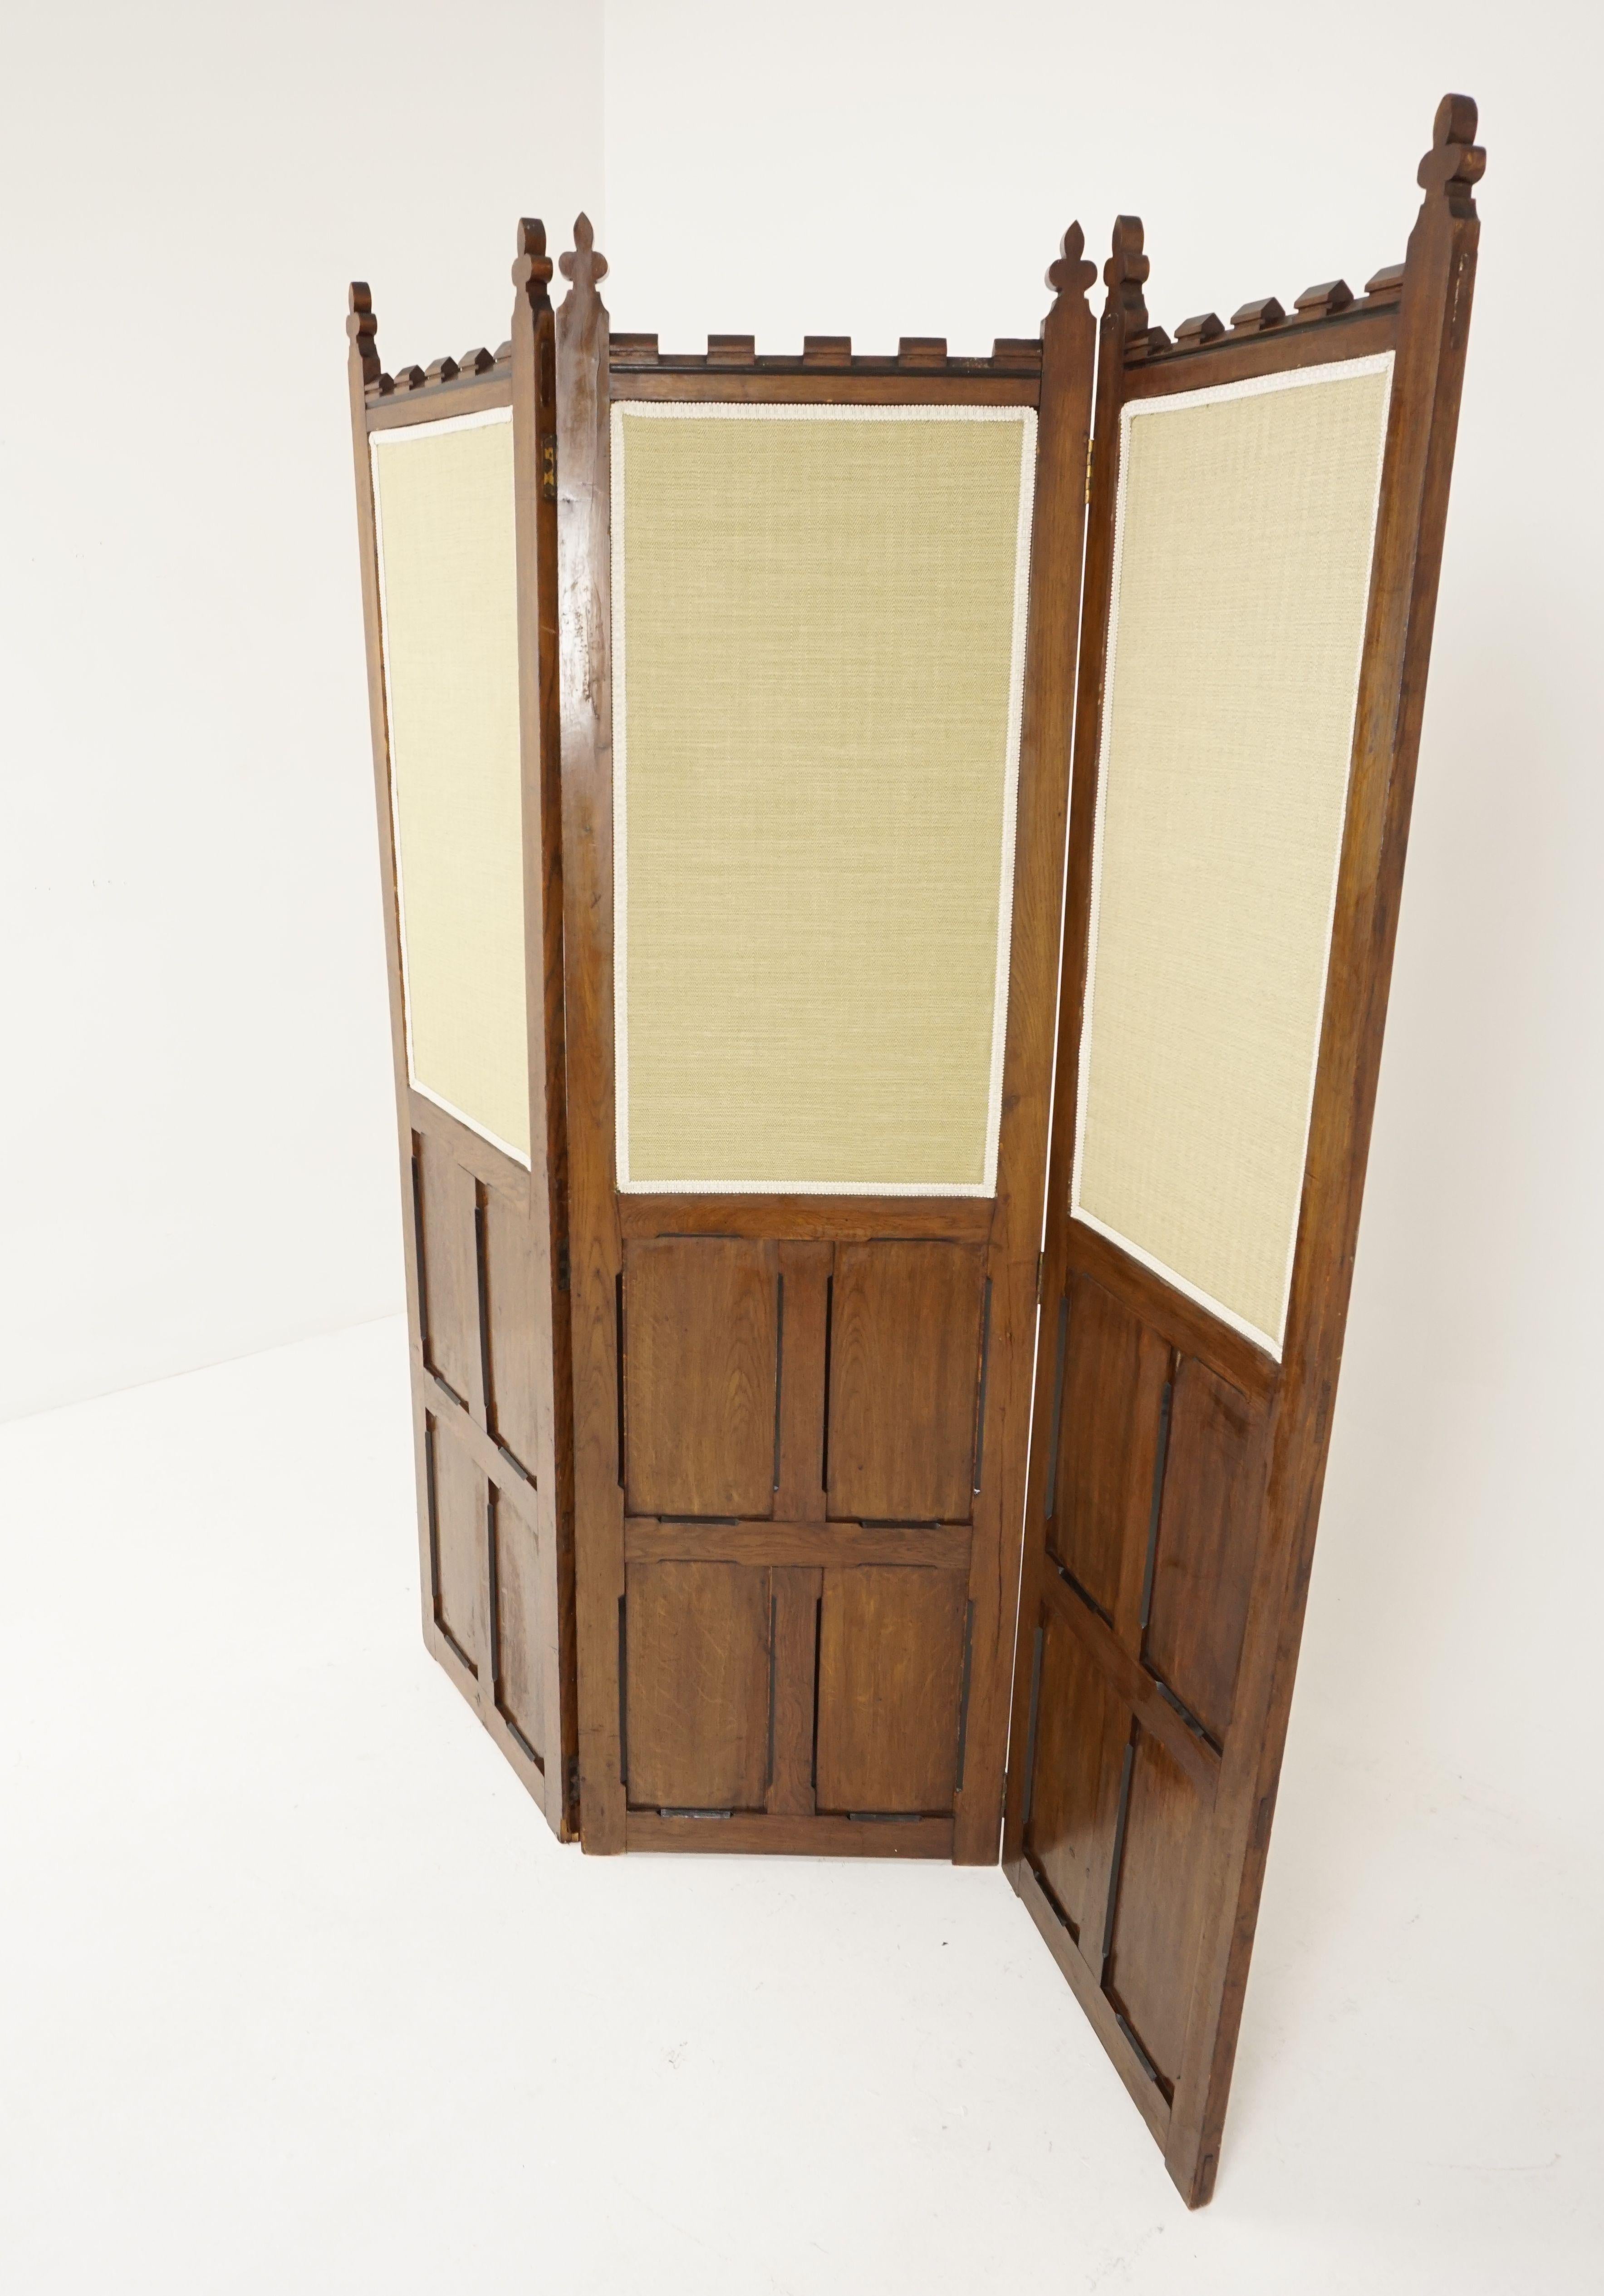 Antique Arts & Crafts folding screen, room divider, three fold, Scotland 1900, B2211

Scotland 1900
Solid oak
Original finish
Shaped gallery top with finials
A cotton fabric upholsters all the panels on top
Bottom panels are all solid oak and